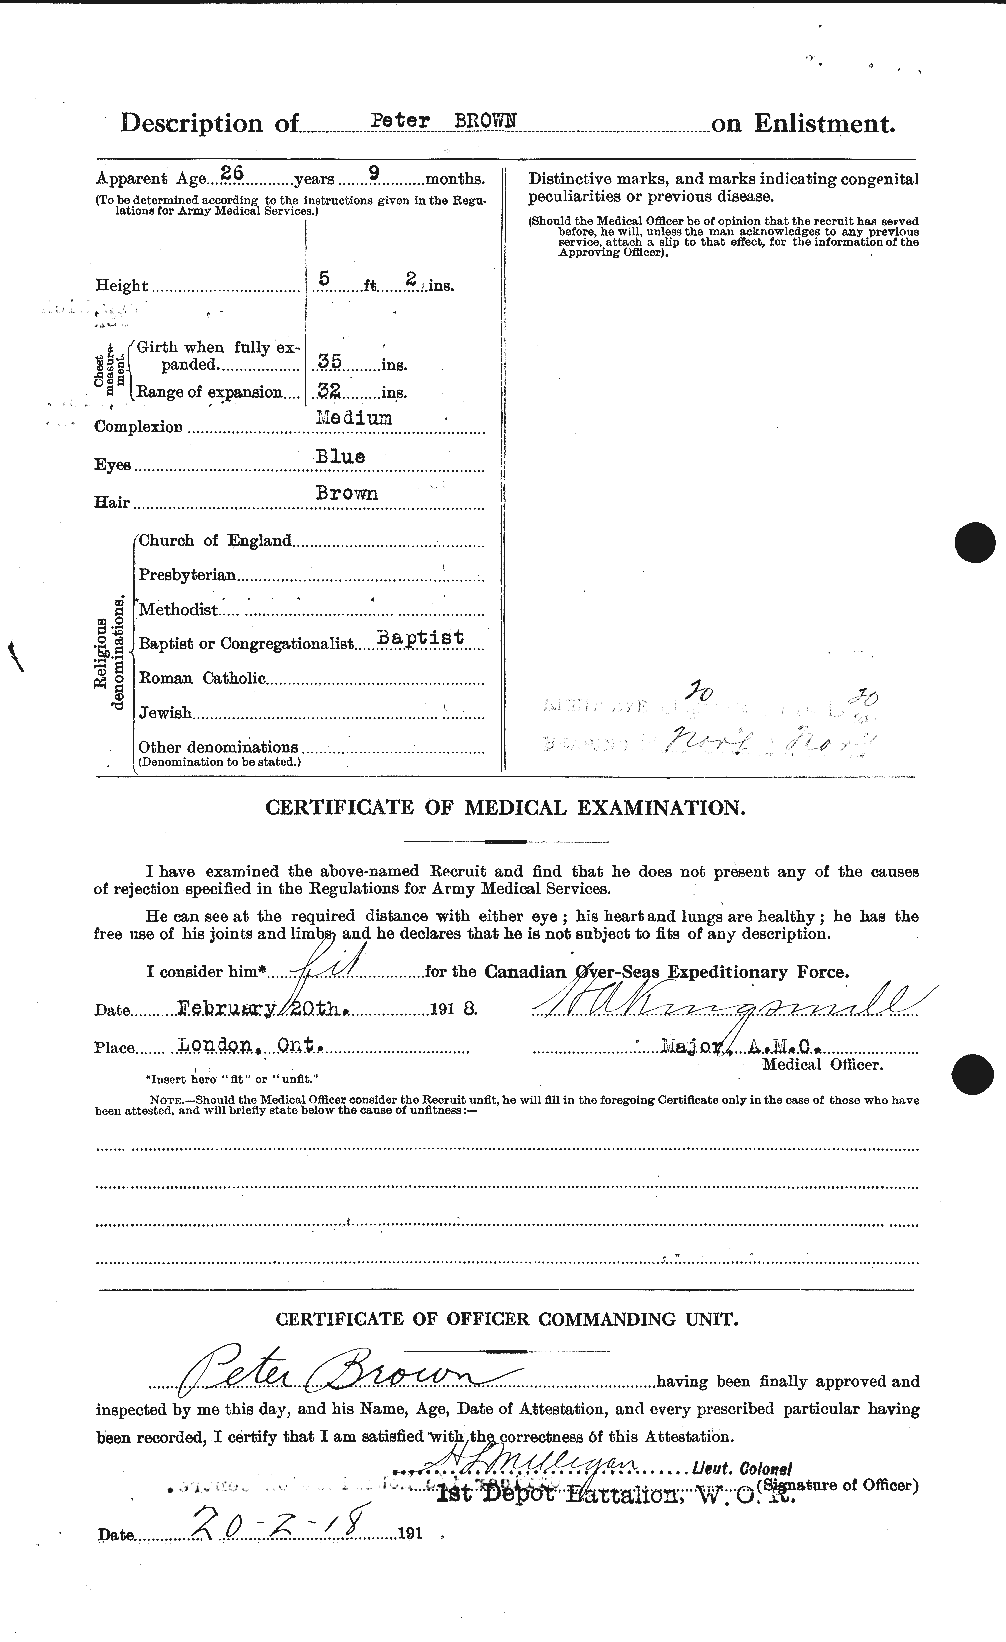 Personnel Records of the First World War - CEF 267198b